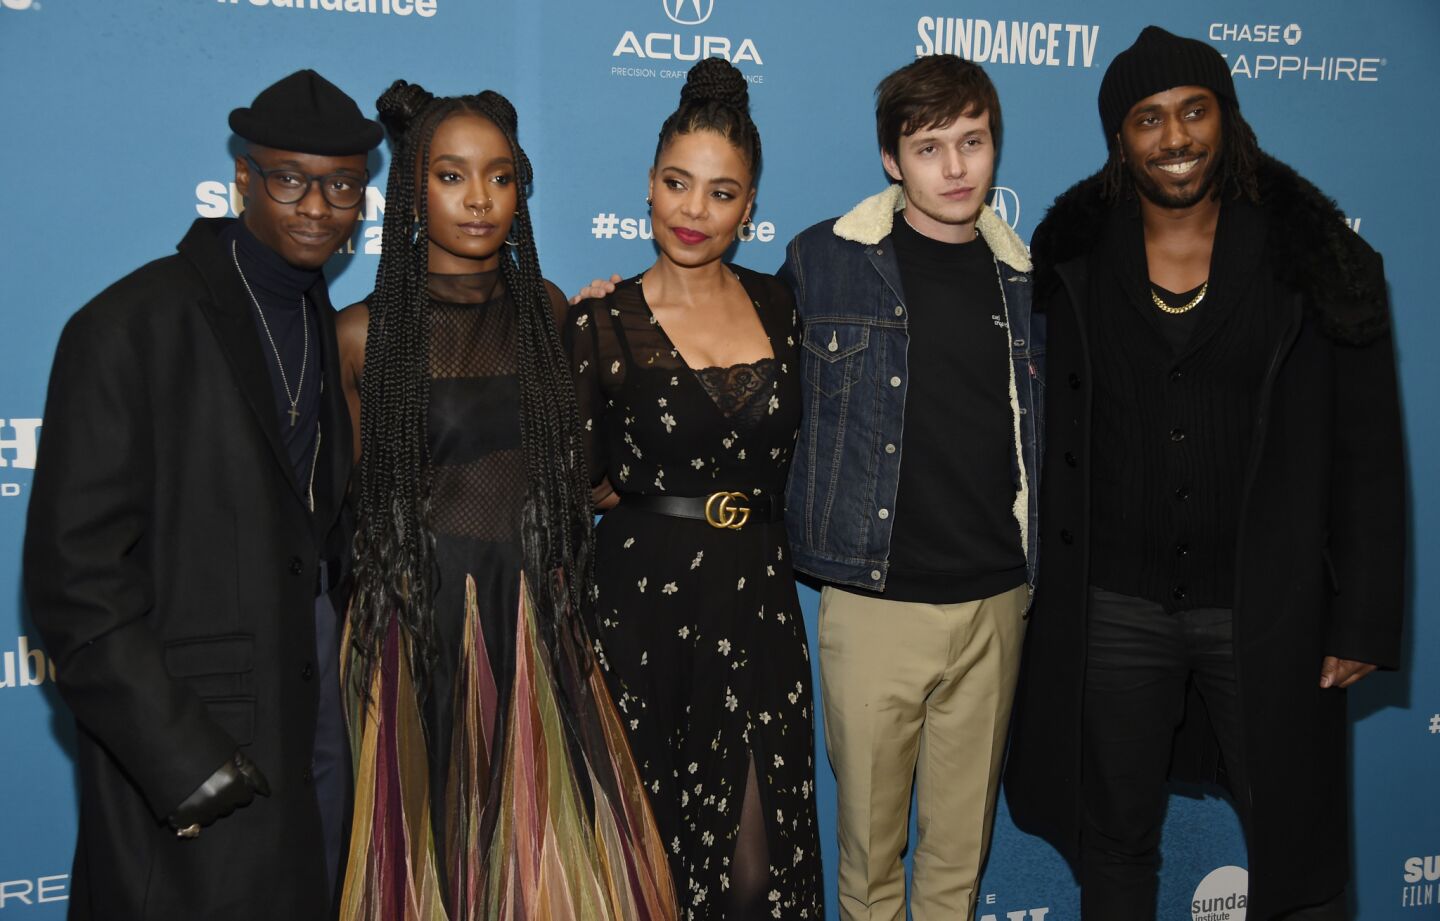 Rashid Johnson, right, director of "Native Son," poses with cast members, from left, Ashton Sanders, KiKi Layne, Sanaa Lathan and Nick Robinson at the premiere of the film Jan. 25 at the 2019 Sundance Film Festival in Park City, Utah.